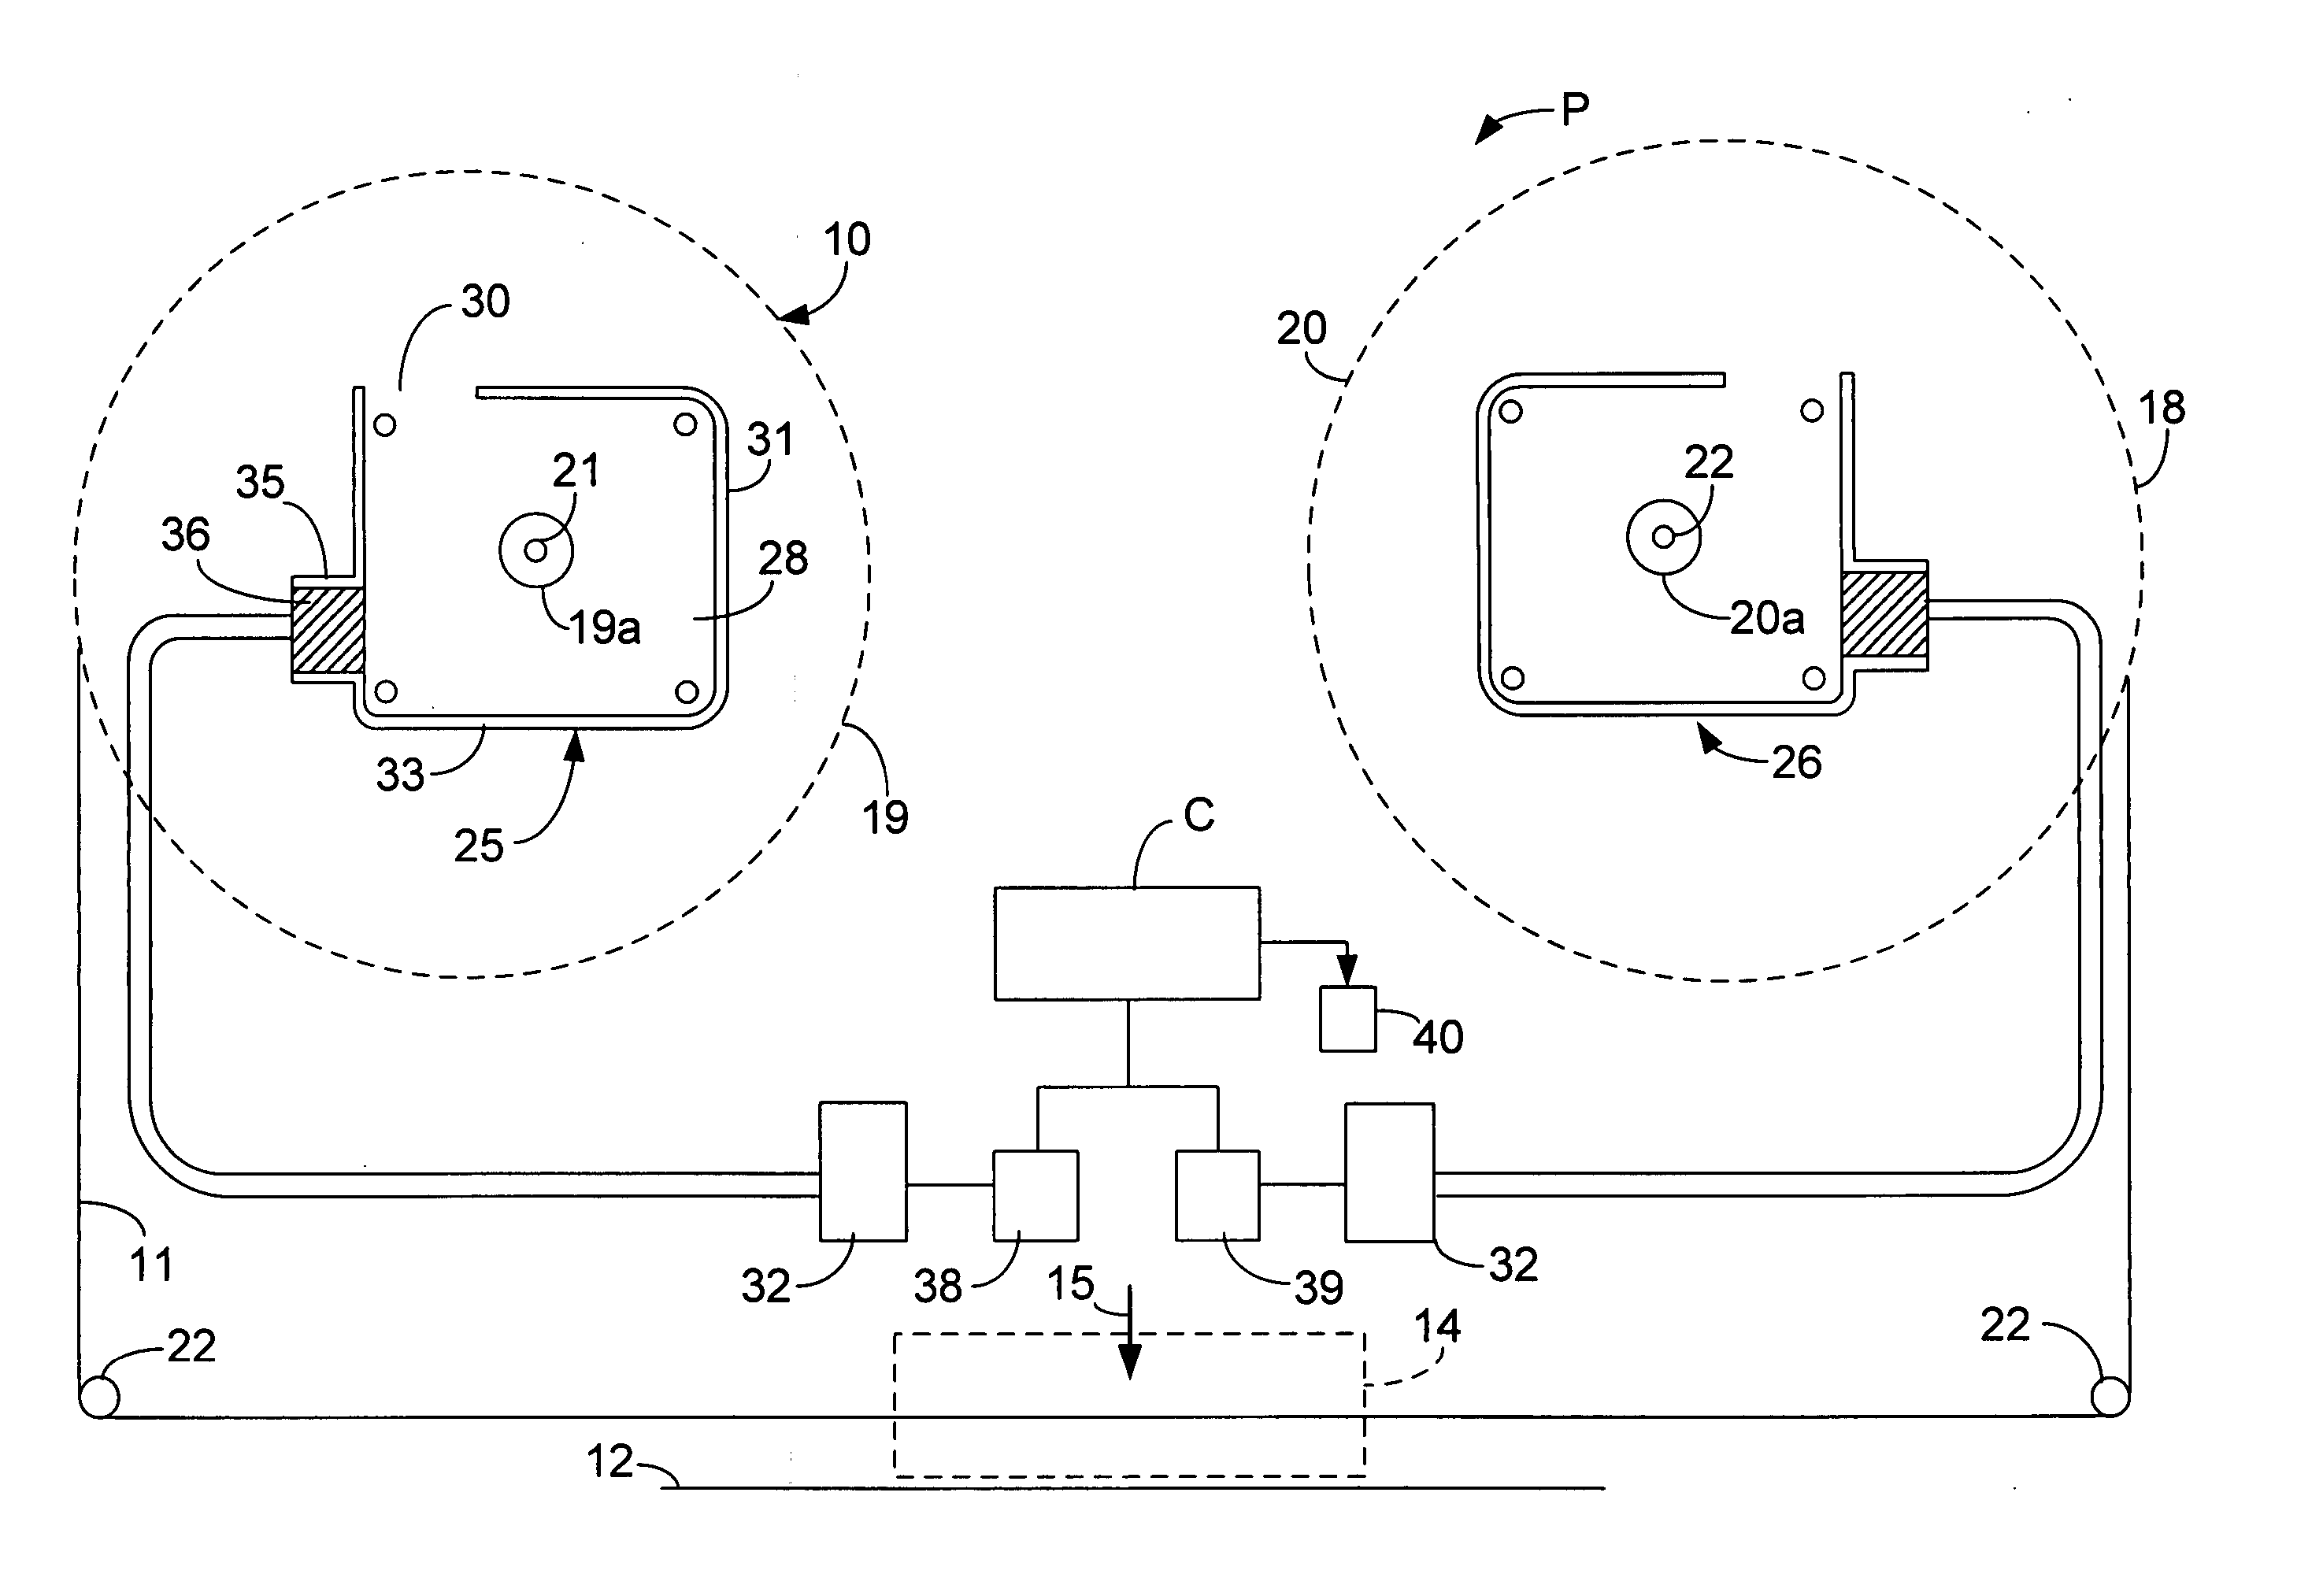 Apparatus for controlling a ribbon transport mechanism